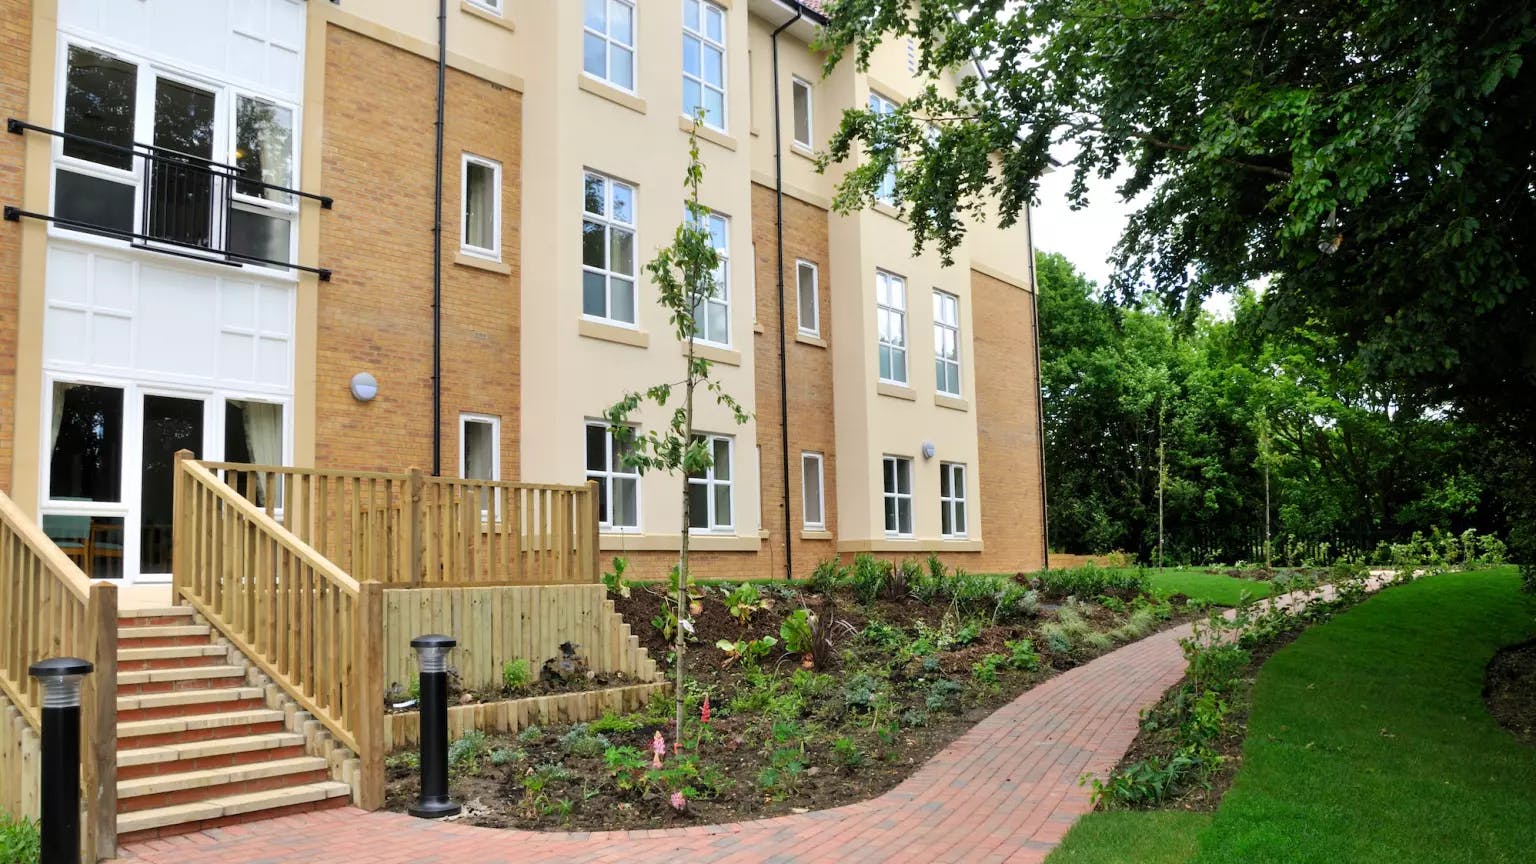 Exterior of Jubilee Court care home in Stevenage, Hertfordshire